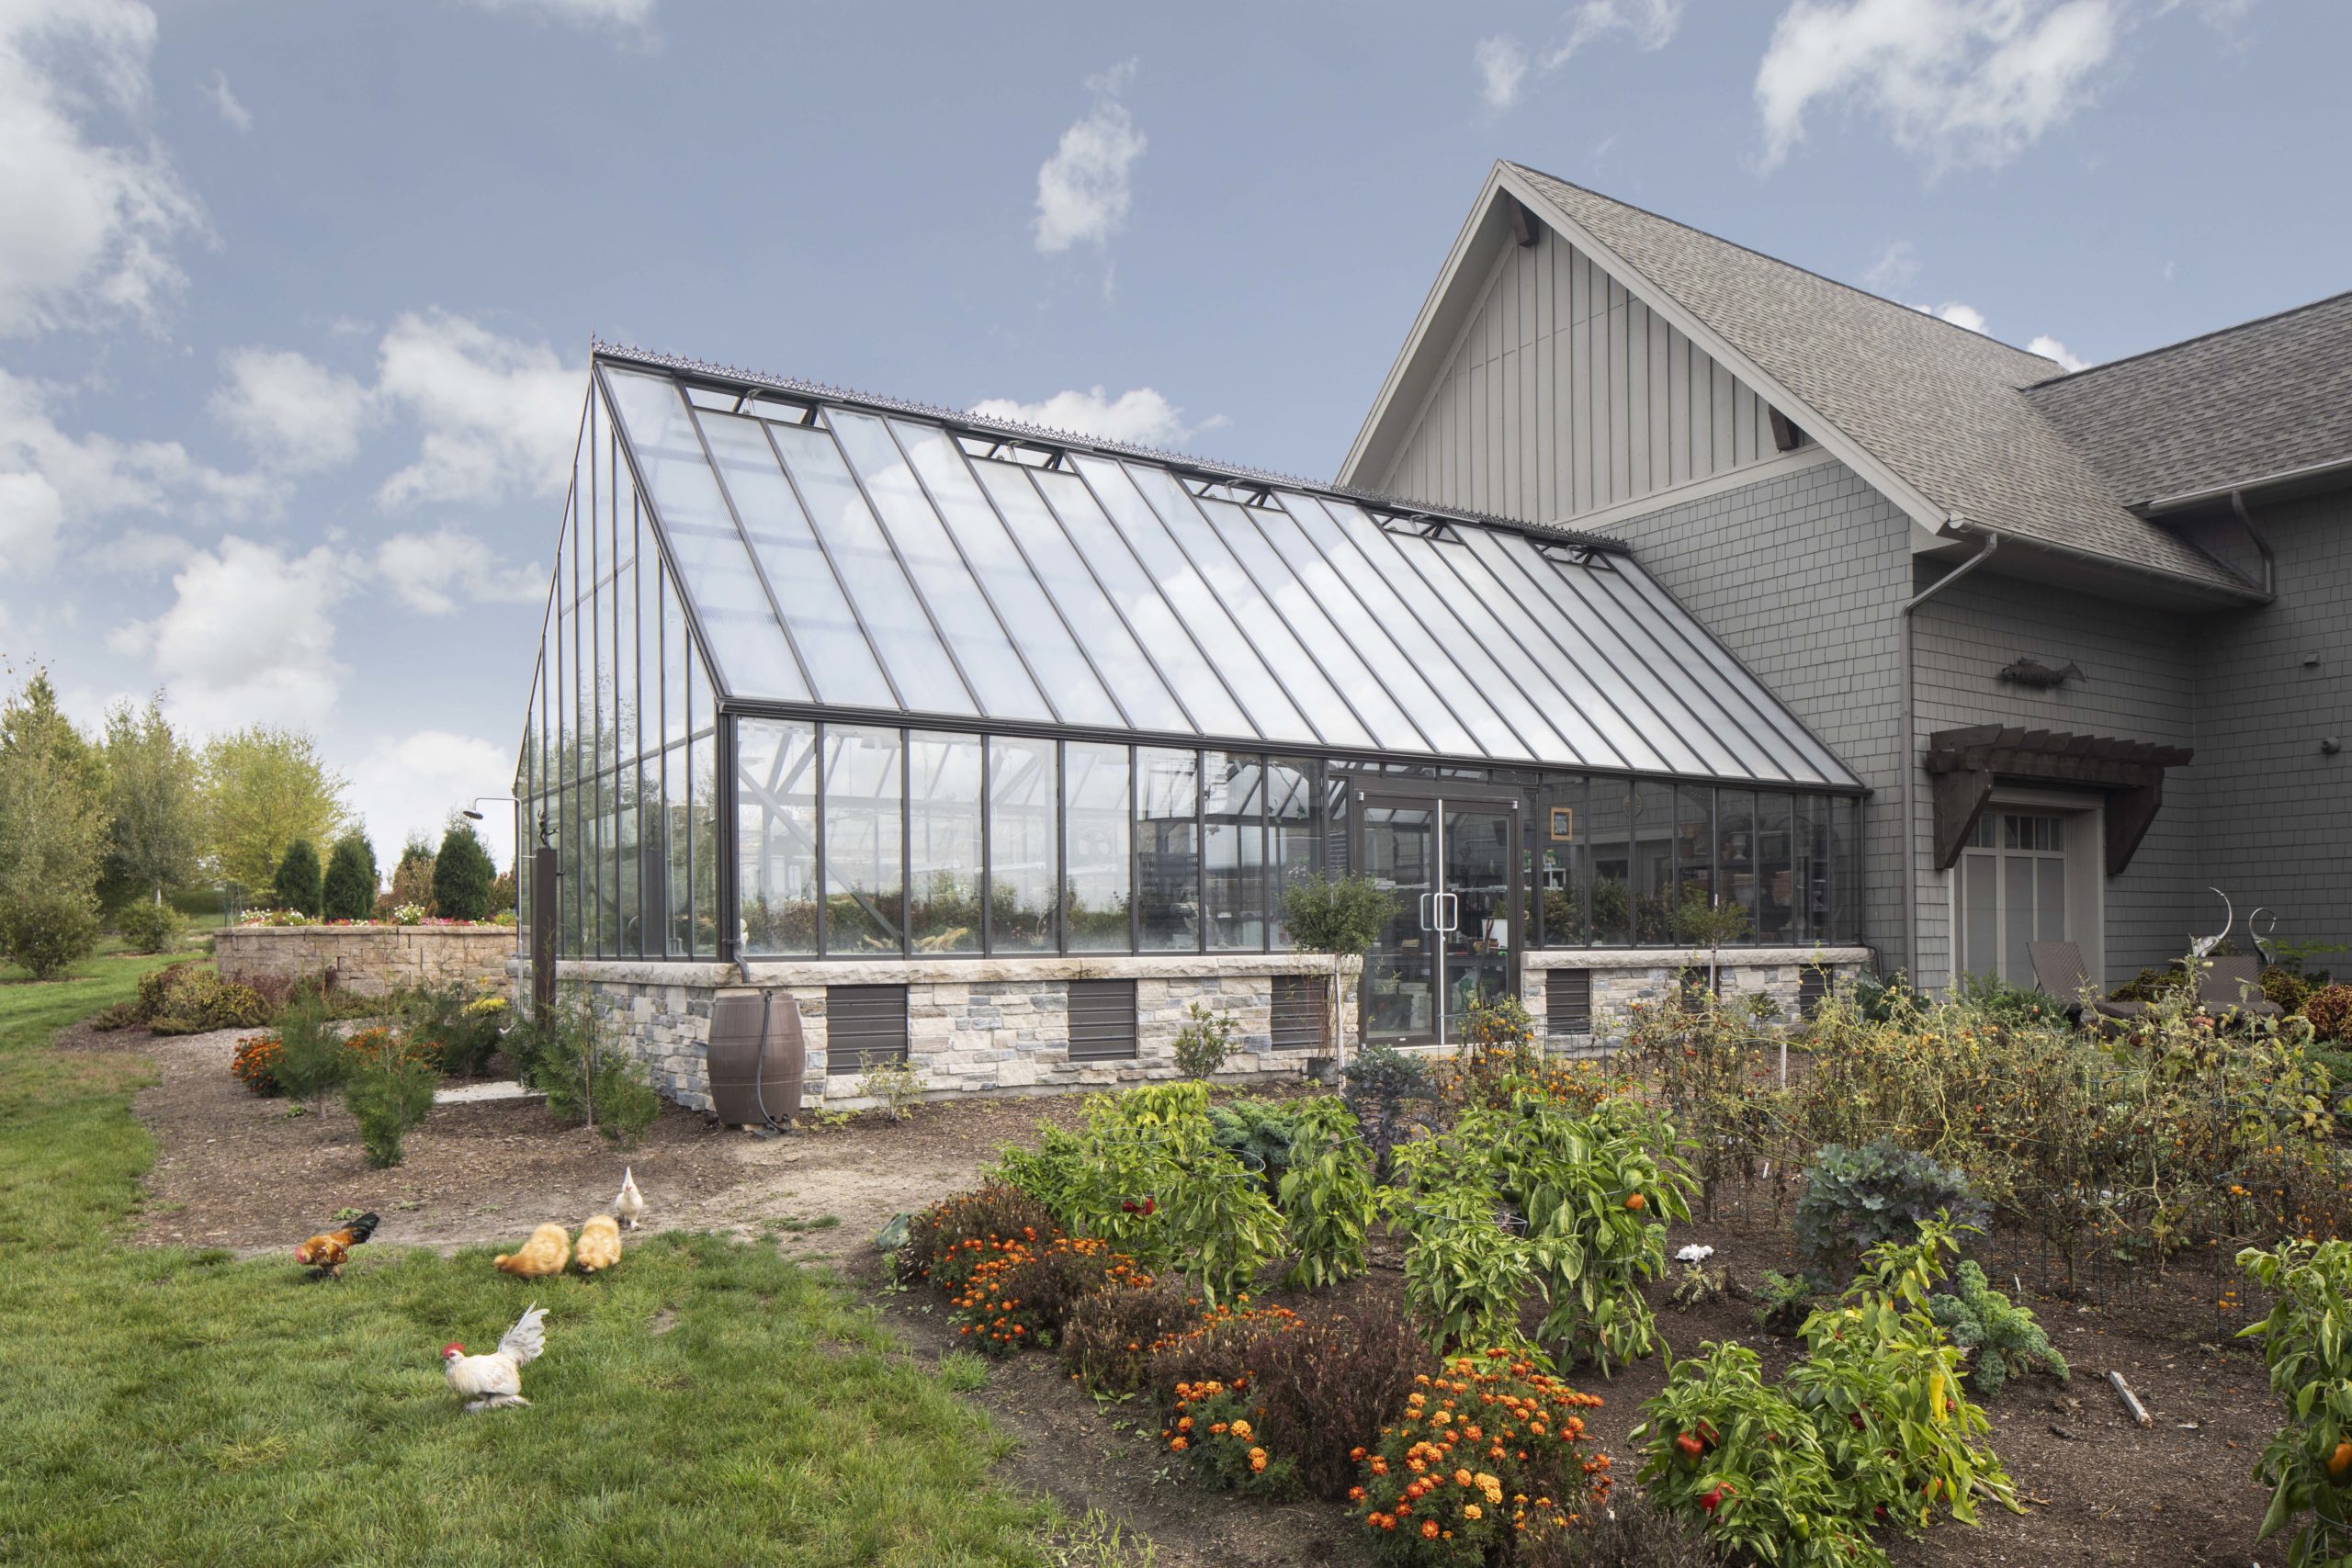 A prairie transitional custom home with a greenhouse and chickens in the yard.